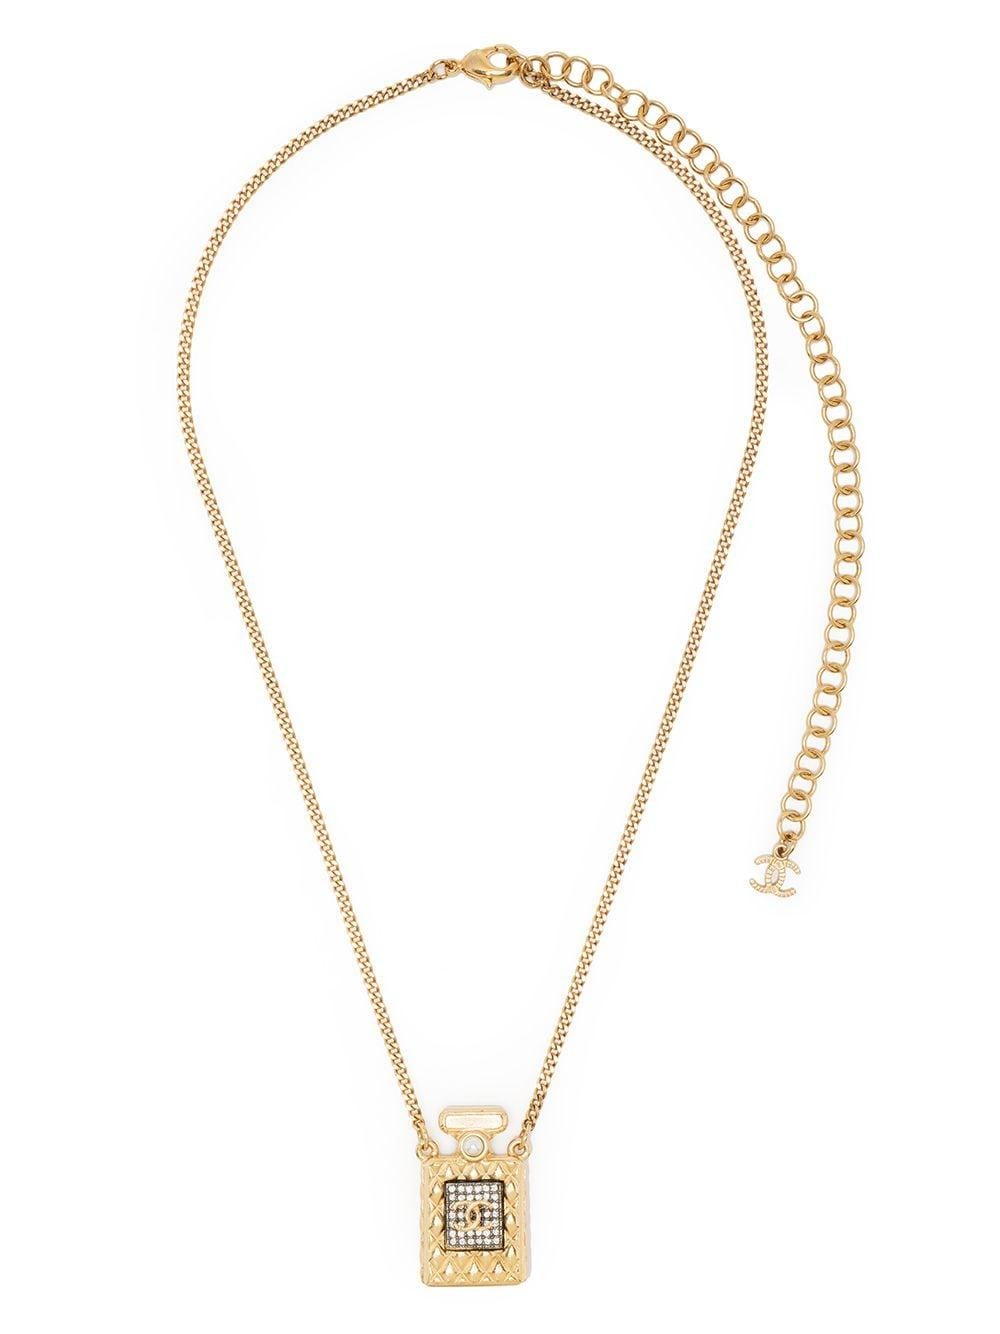 Crafted in France, this elegant pre-owned necklace from Chanel is a unique piece that adds a touch of excitement to almost any outfit. Featuring the signature Chanel No. 5 perfume bottle design, this distinctive piece is the perfect accessory for